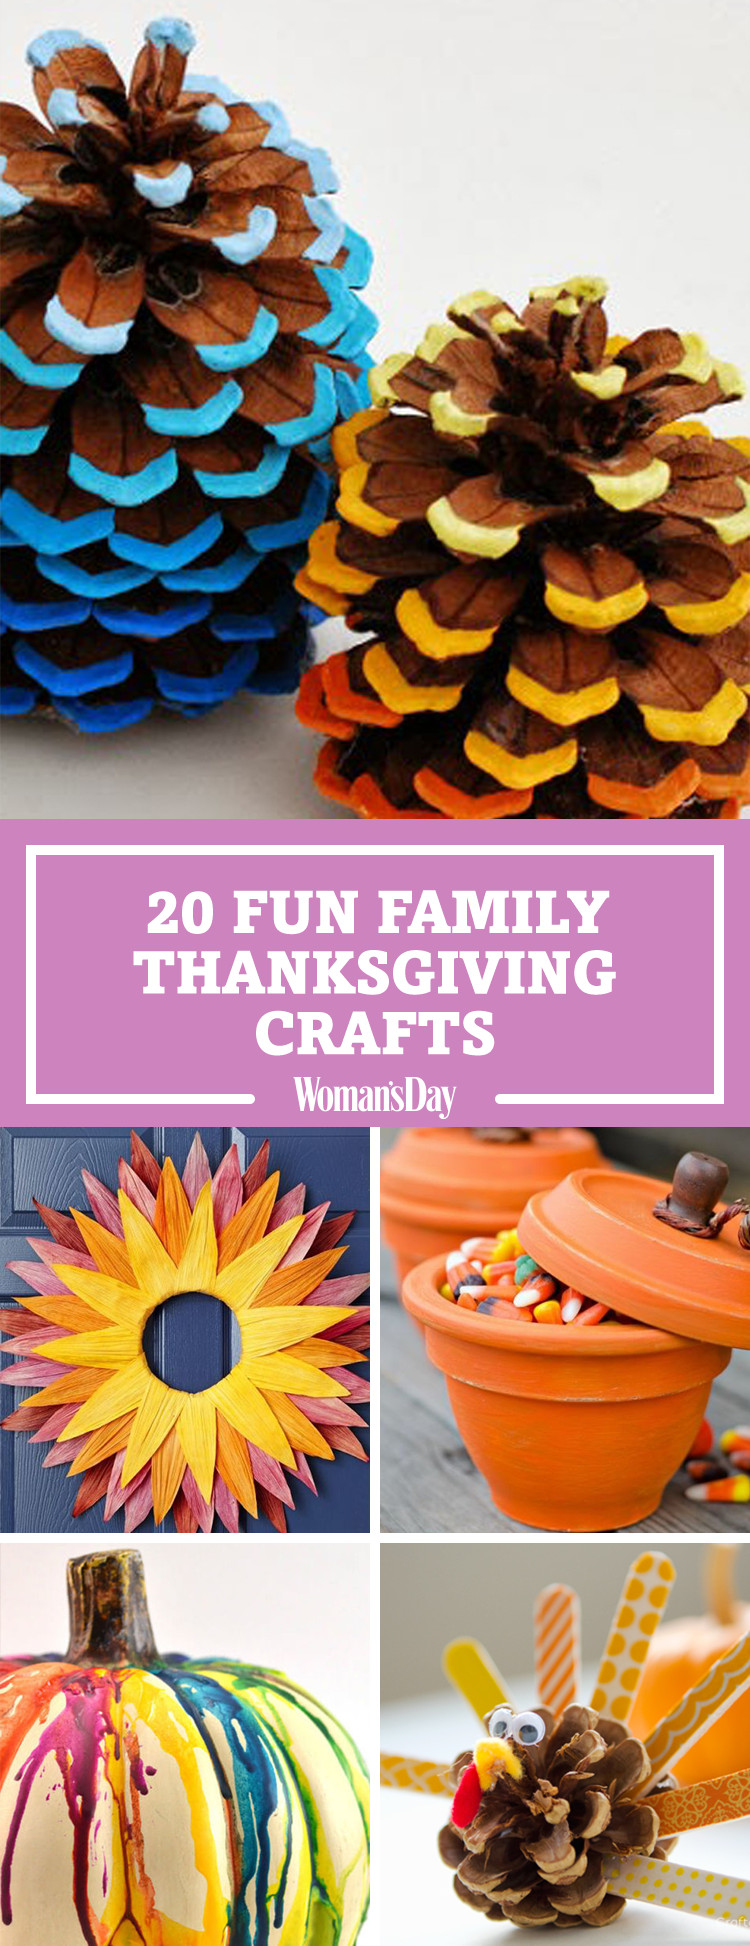 Pinterest Thanksgiving Crafts
 29 Fun Thanksgiving Crafts for Kids Easy DIY Ideas to